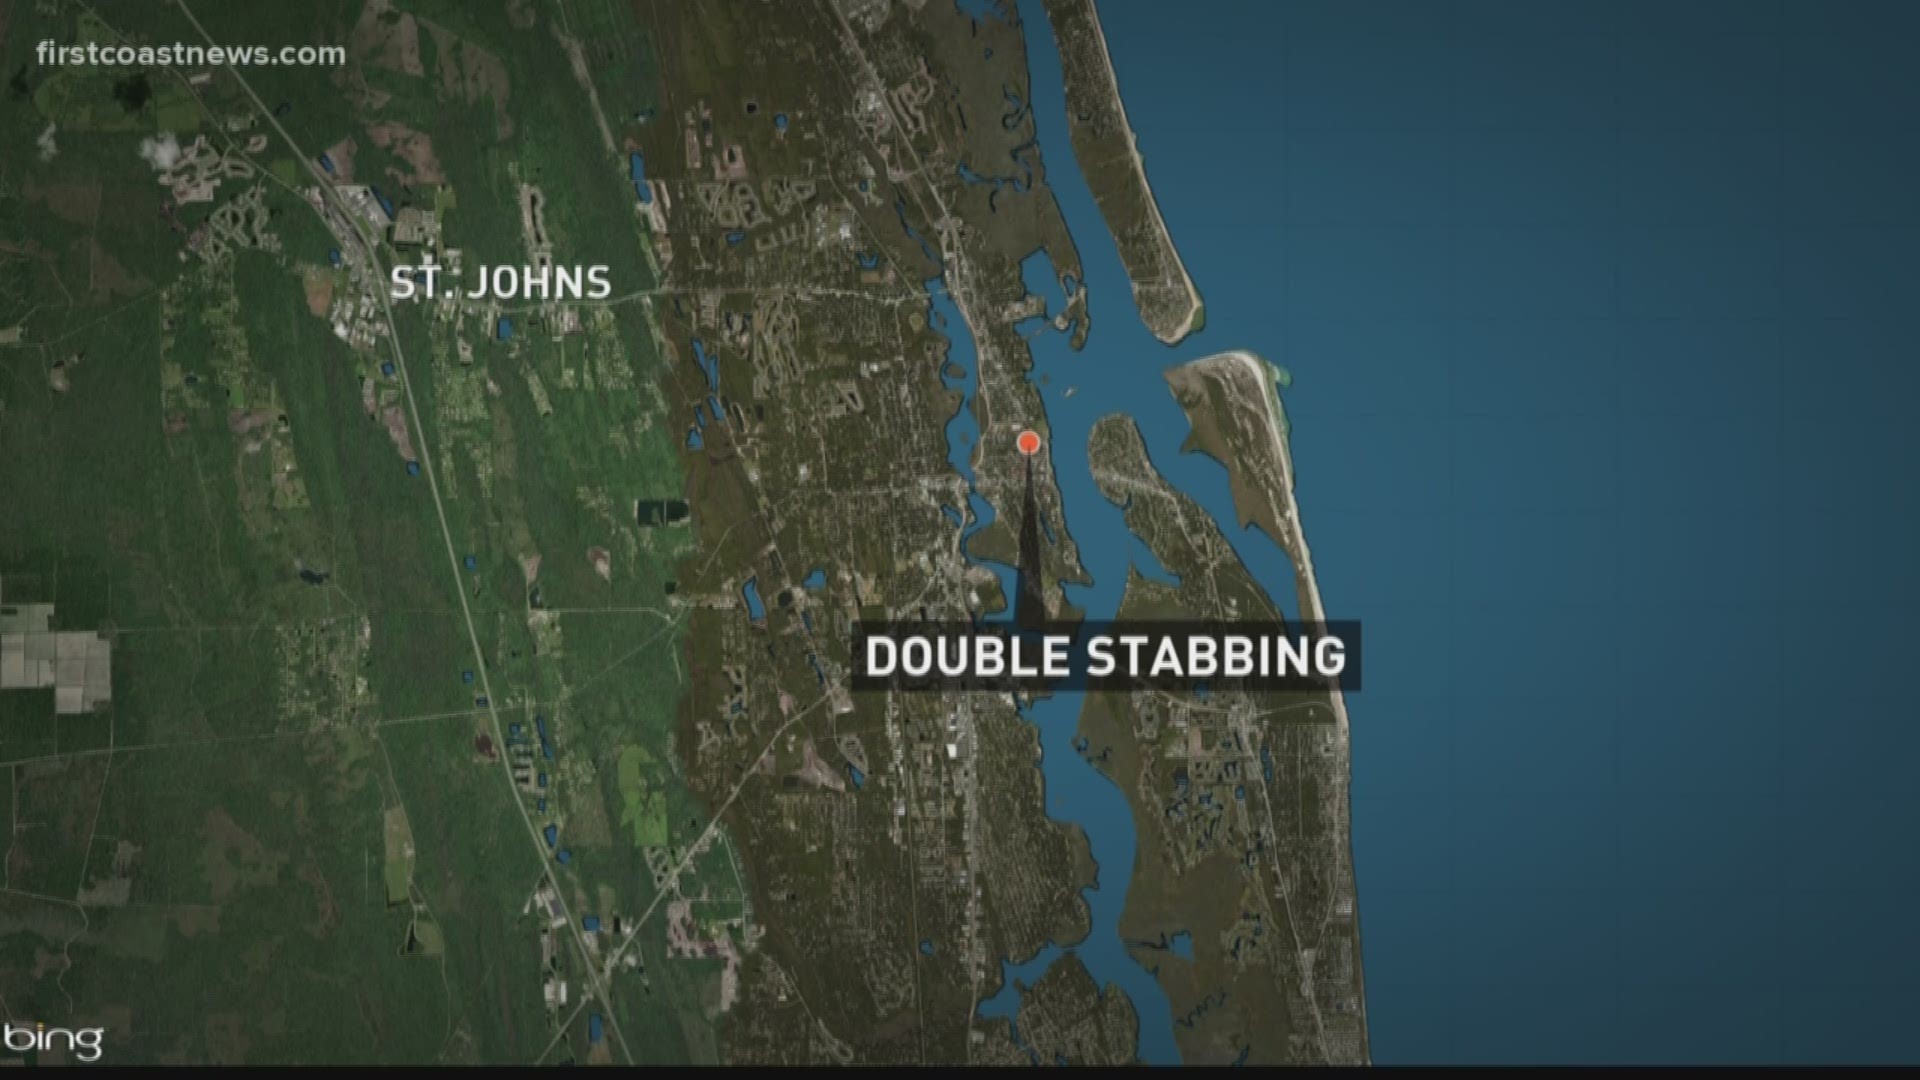 Police say two people were stabbed overnight in St. Augustine.